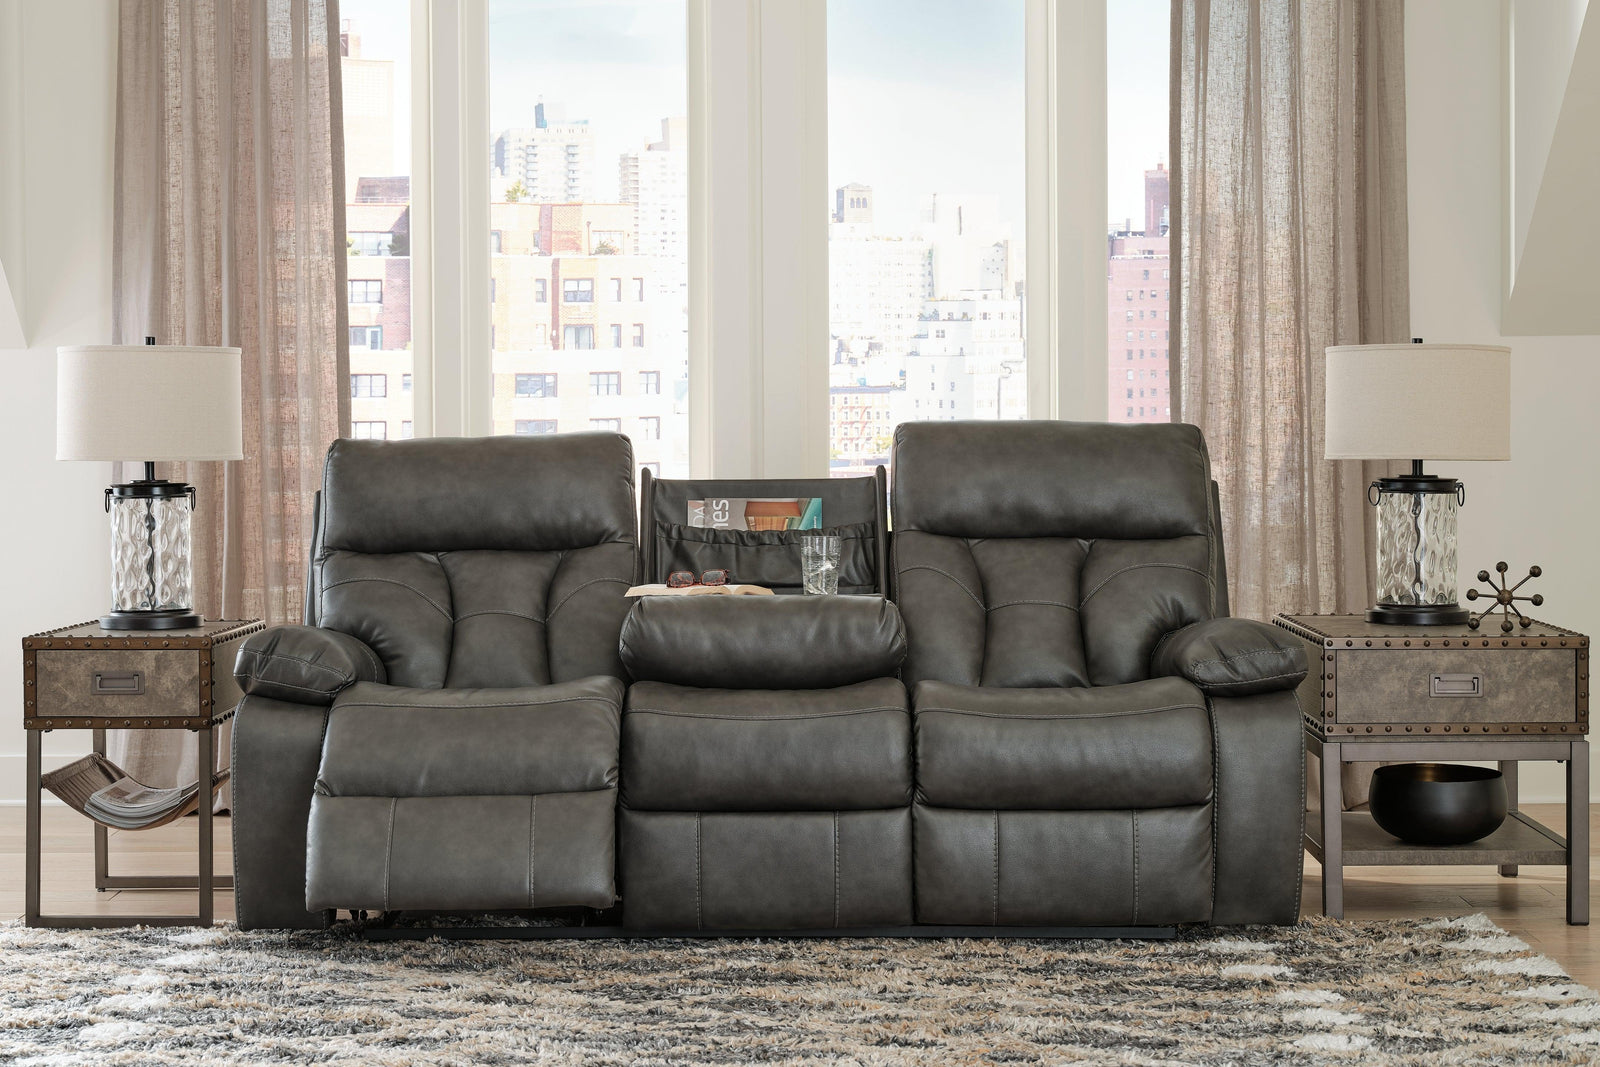 Willamen Quarry Faux Leather Reclining Sofa With Drop Down Table - Ella Furniture